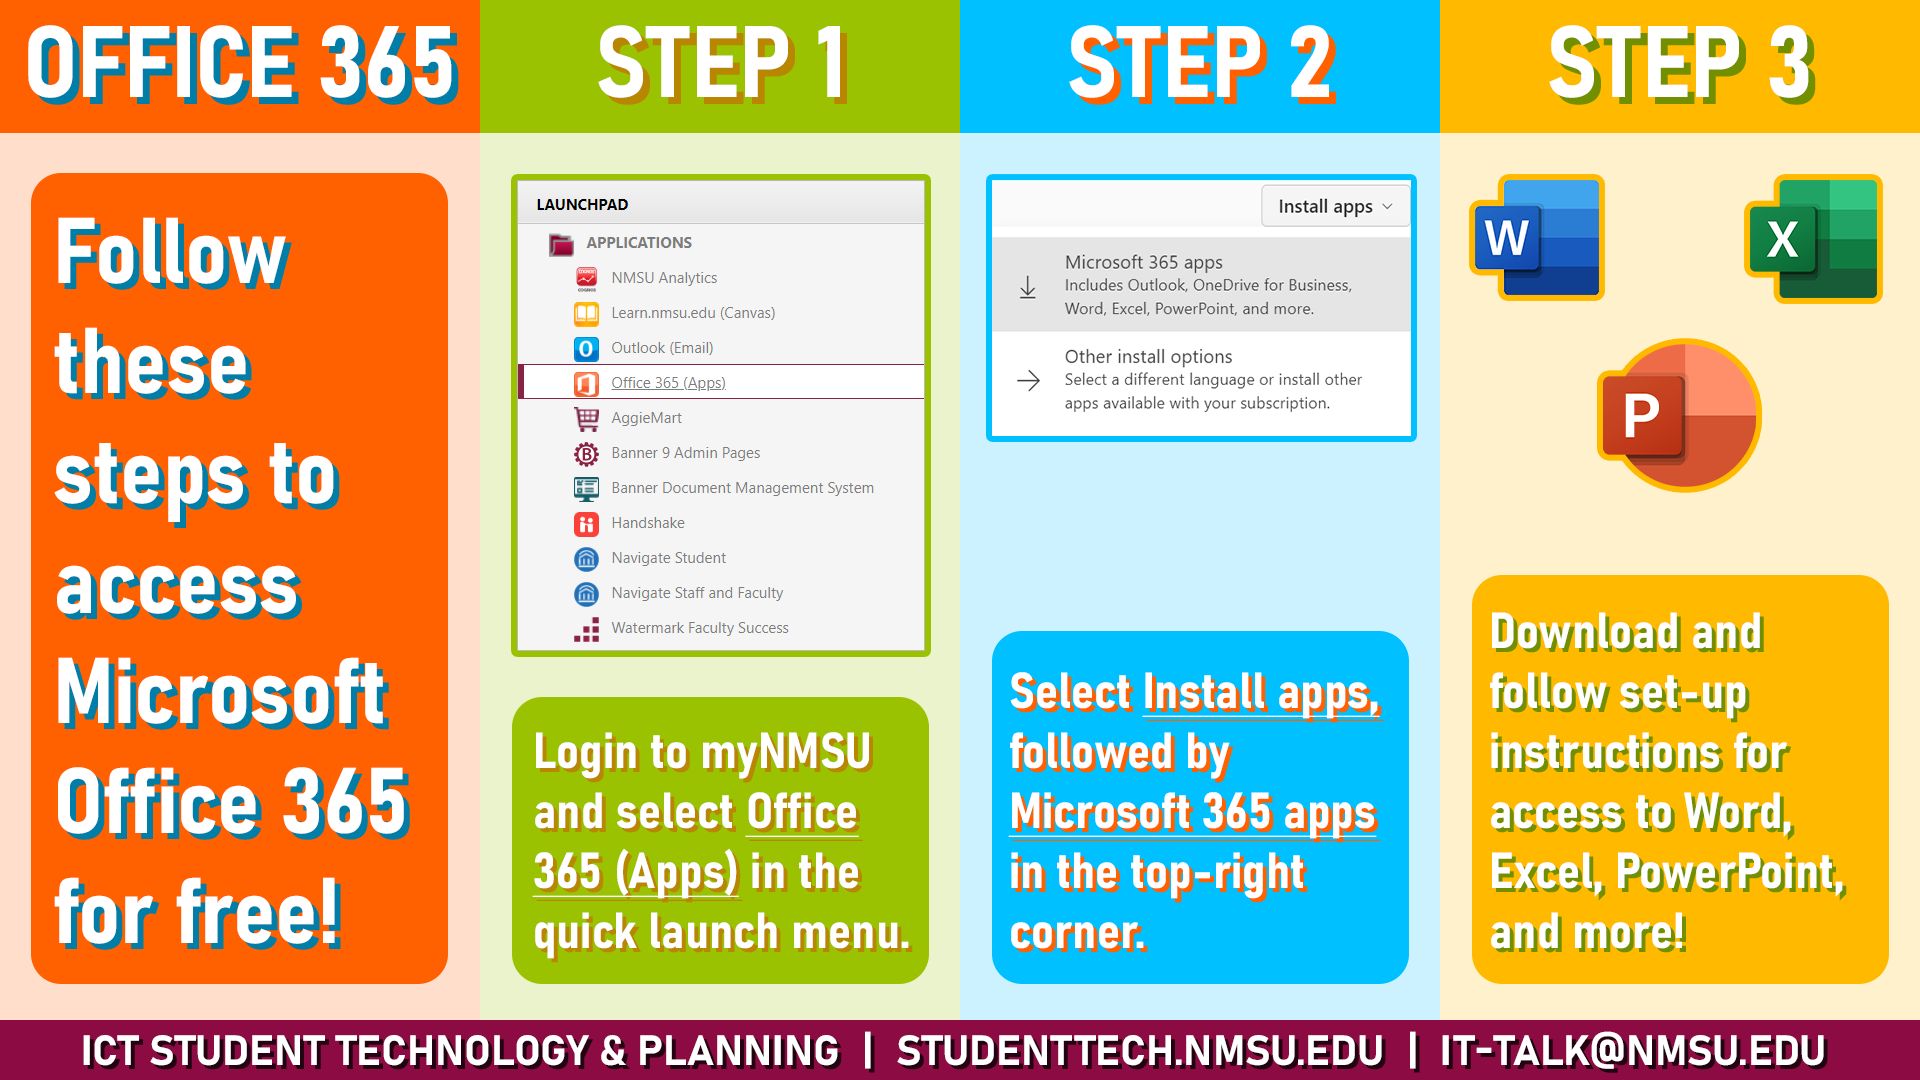 To access Office 365 for free, login to mynmsu and select 'Office 365 (Apps) in the quick launch menu. Select 'Install apps,' followed by 'Microsoft 365 apps.' Download and follow set-up instructions for access to Word, Excel, PowerPoint, and more!